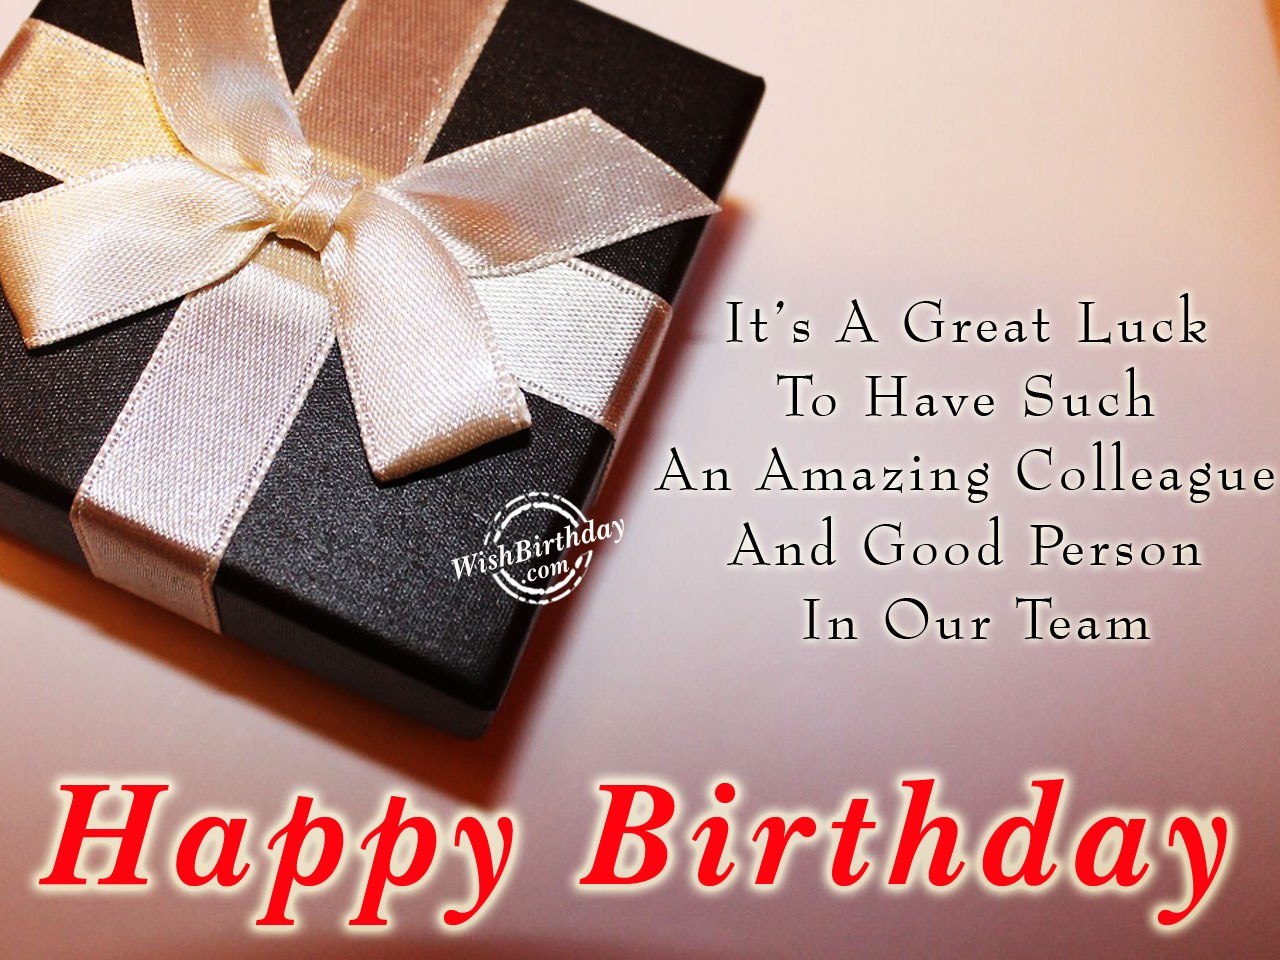 🥳 Happy birthday images For Colleague 💐 - Free bday cards and pictures.